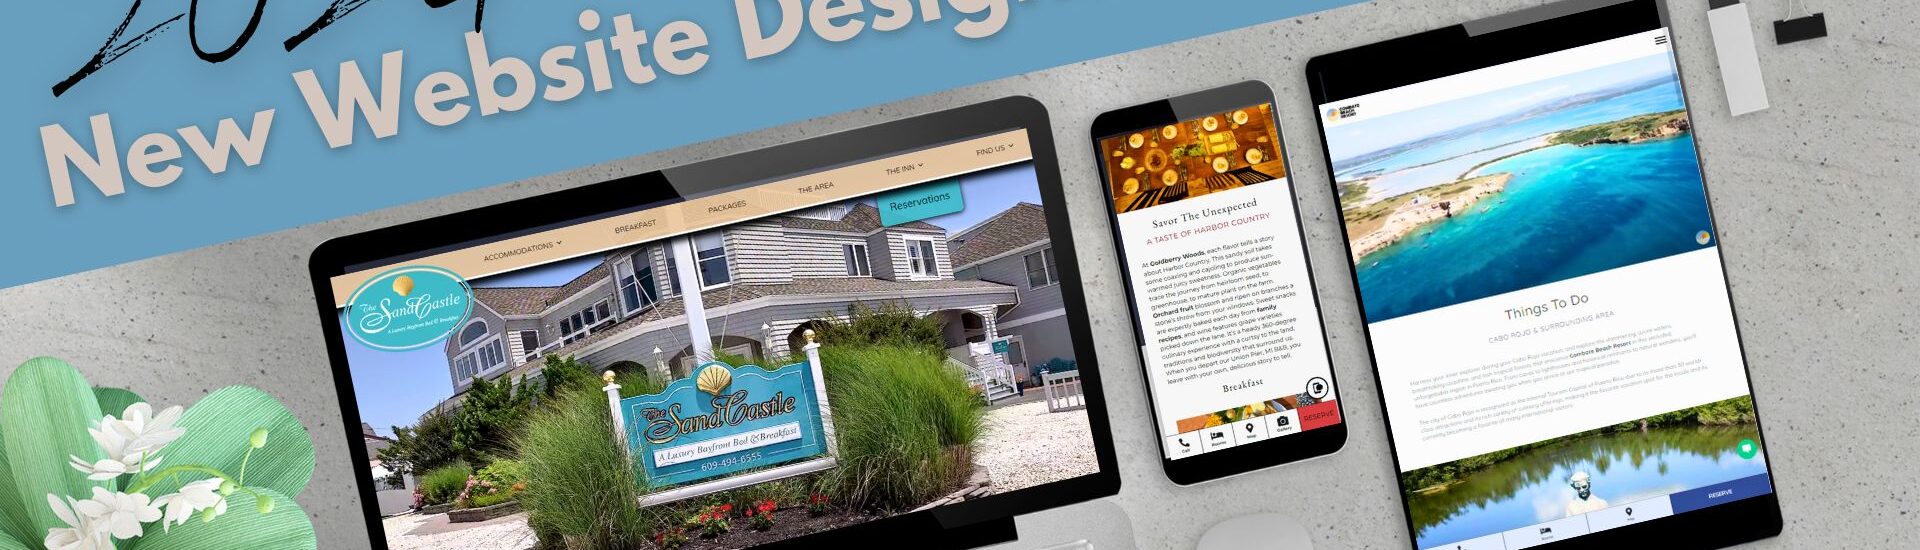 Website Designs on Desktop, Tablet and phone, with wording about New 2024 website designs